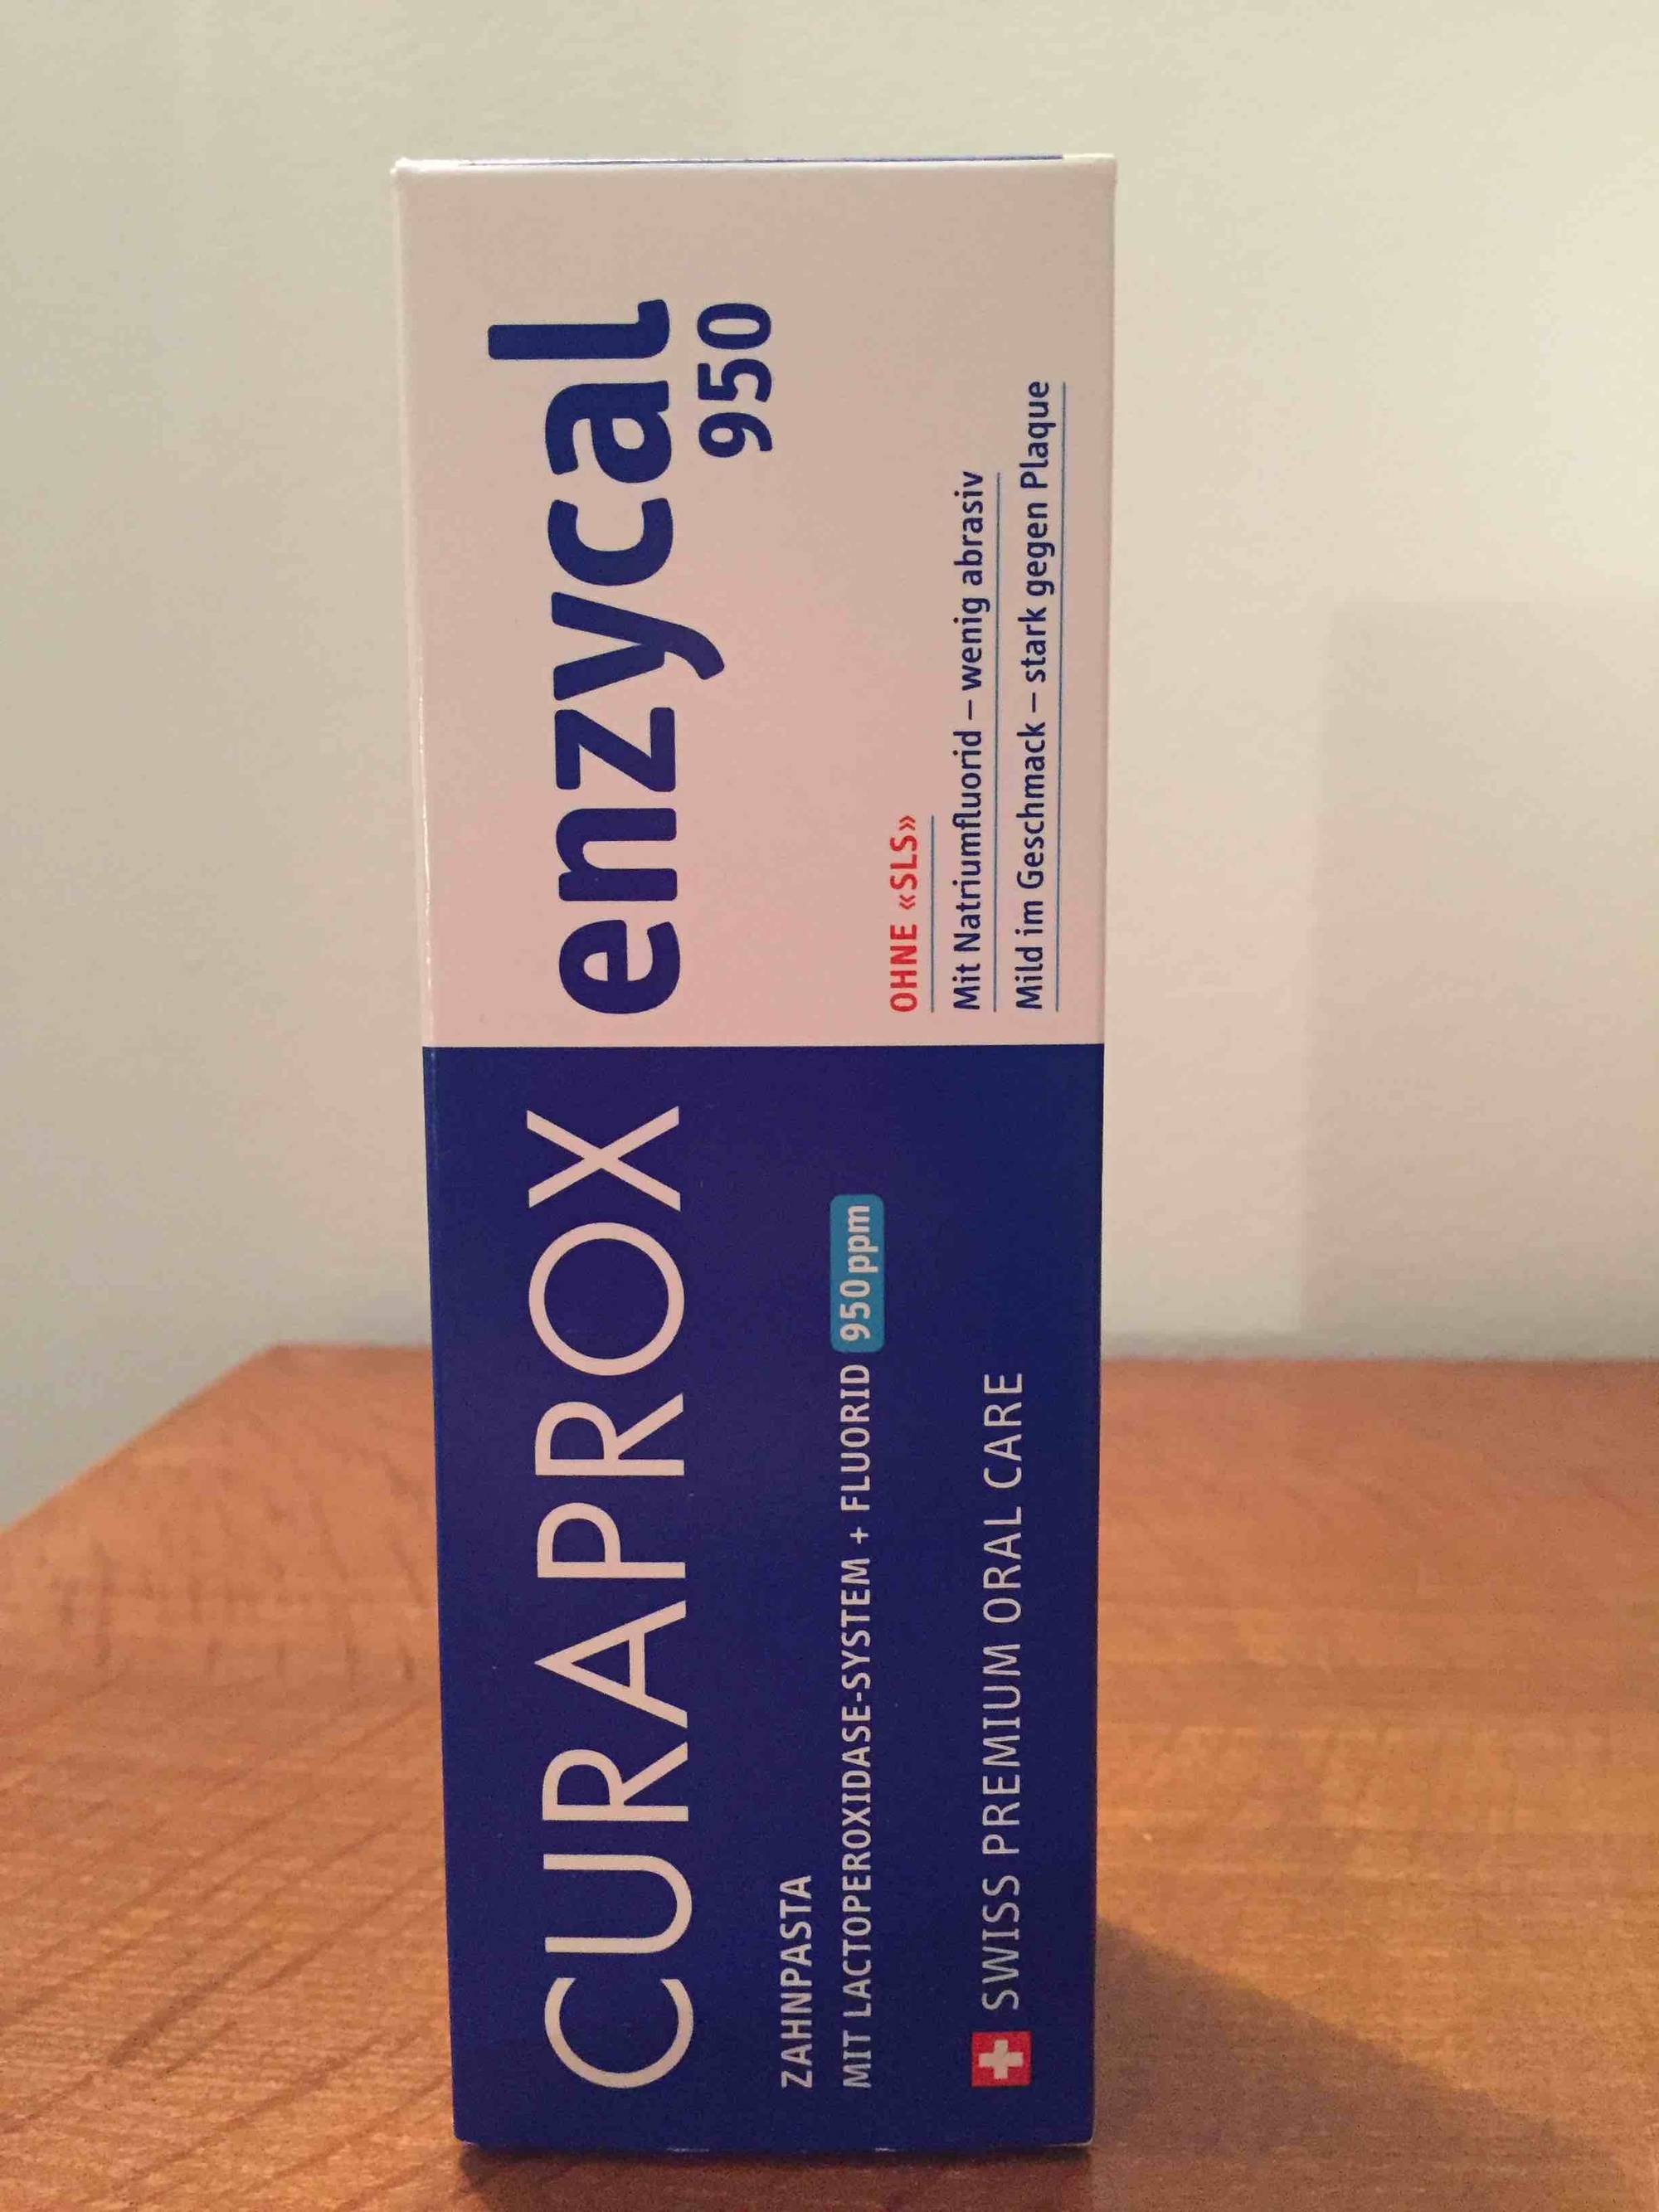 CURAPROX - Enzycal 950 - Dentifrices anti-carie